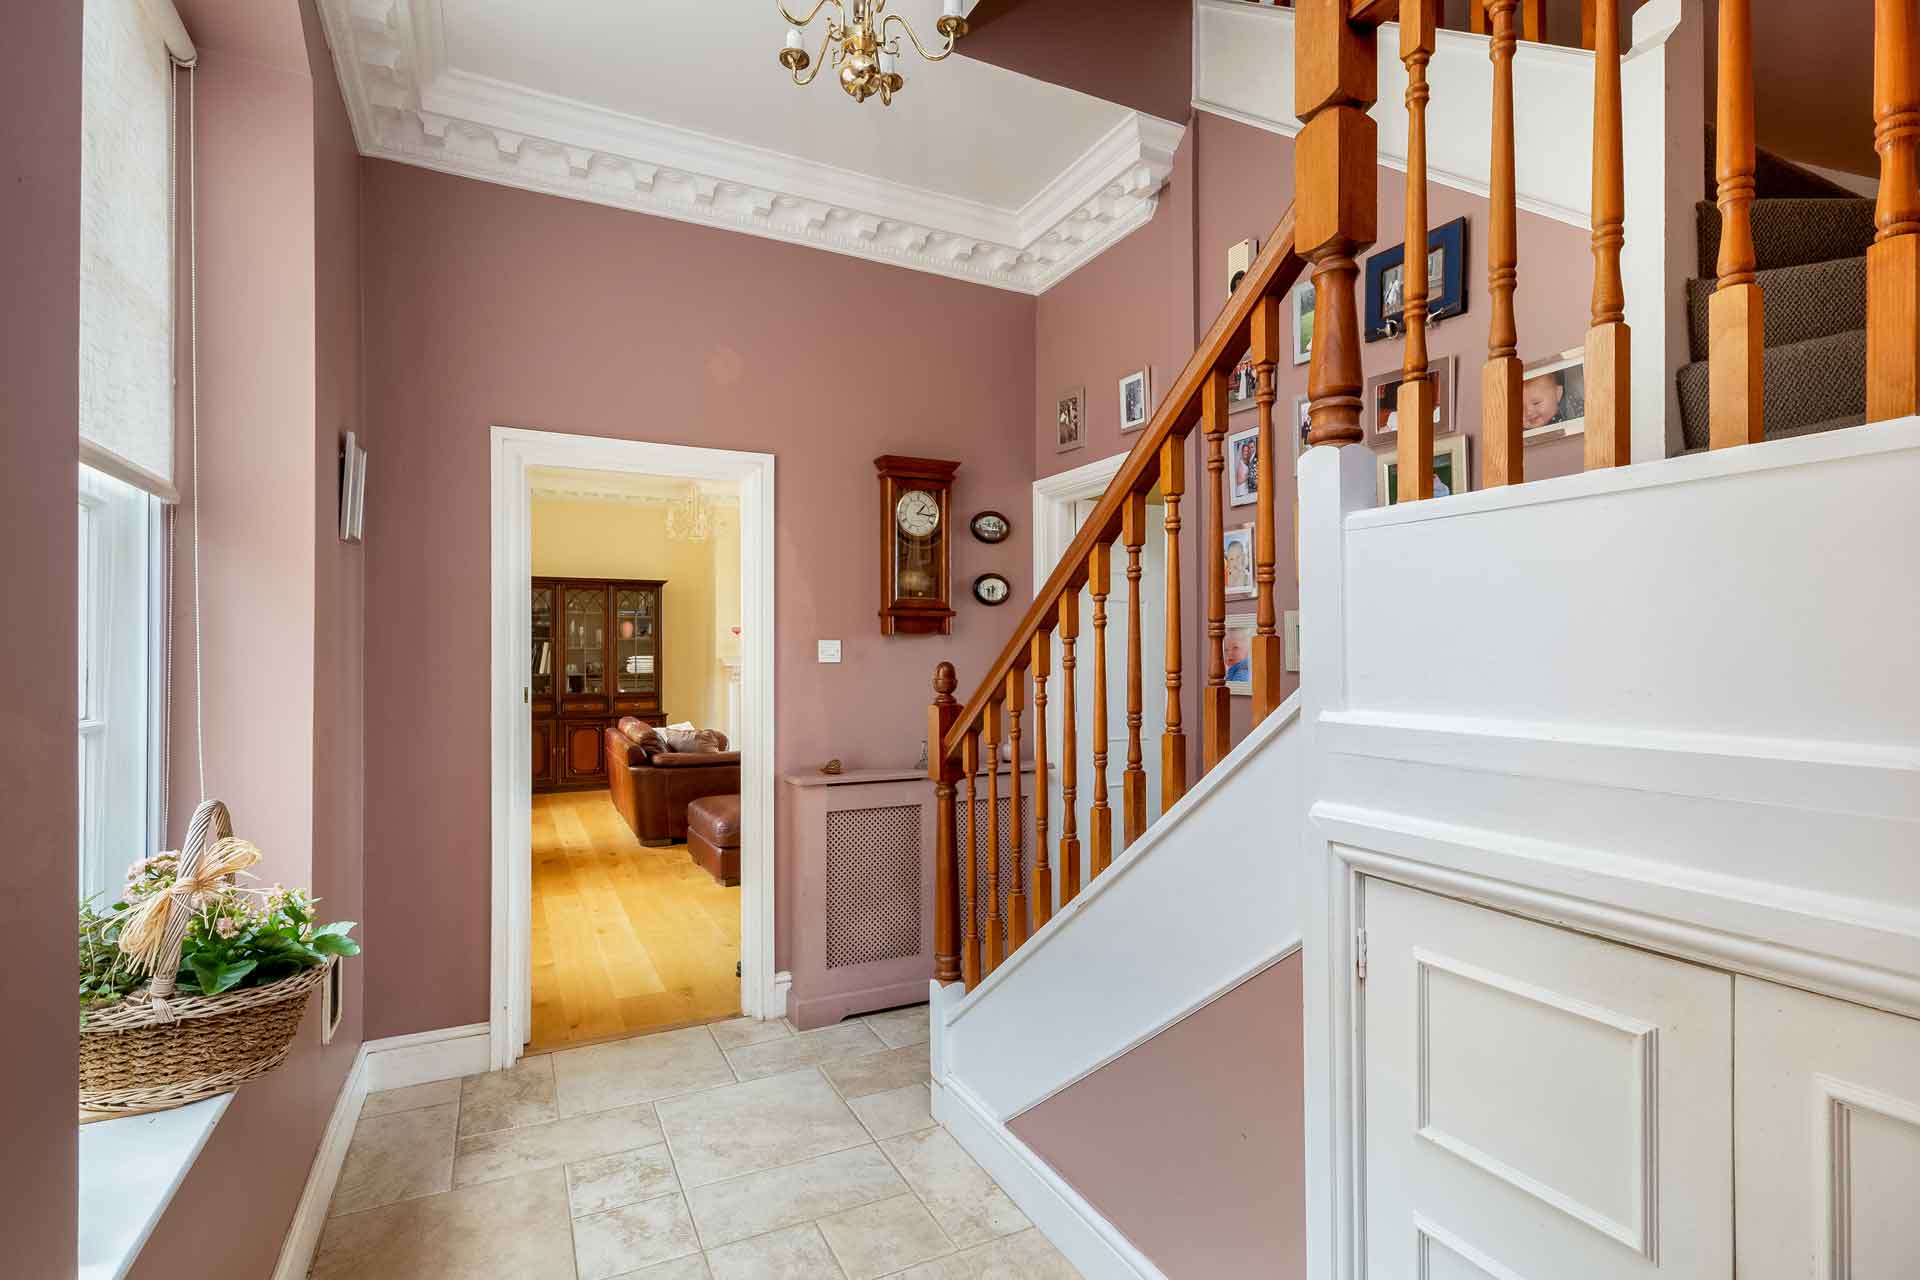 Hallway with dusty pink walls and white cornicing